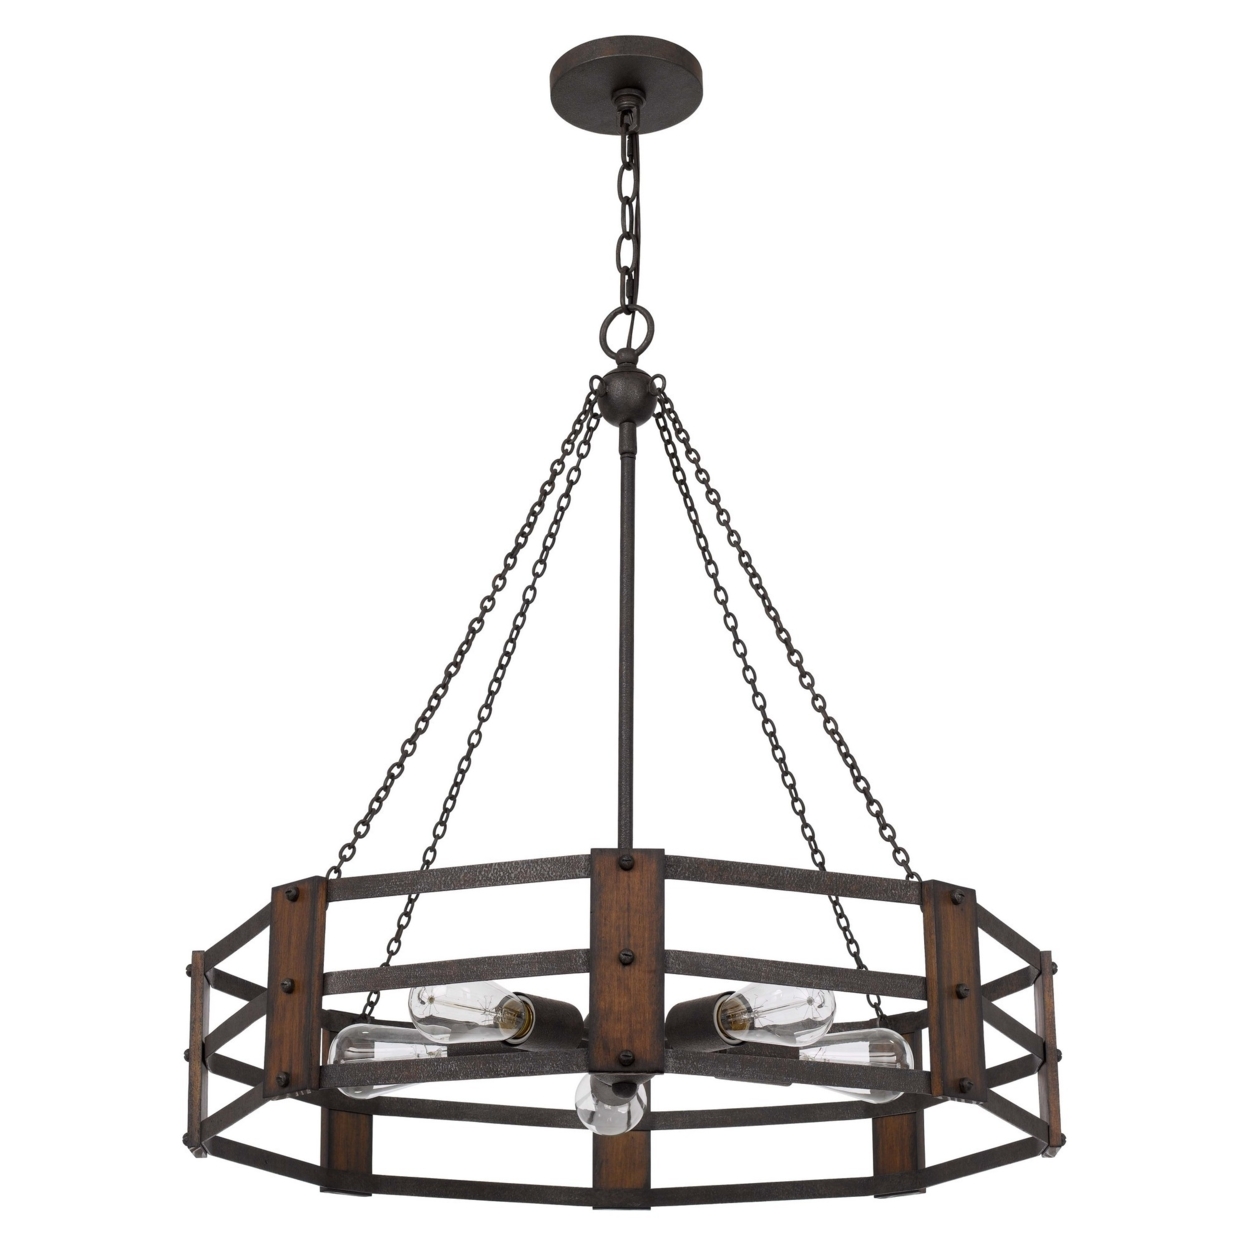 Chandelier With Octagonal Cage Design Metal Frame And Wood Accents, Brown- Saltoro Sherpi